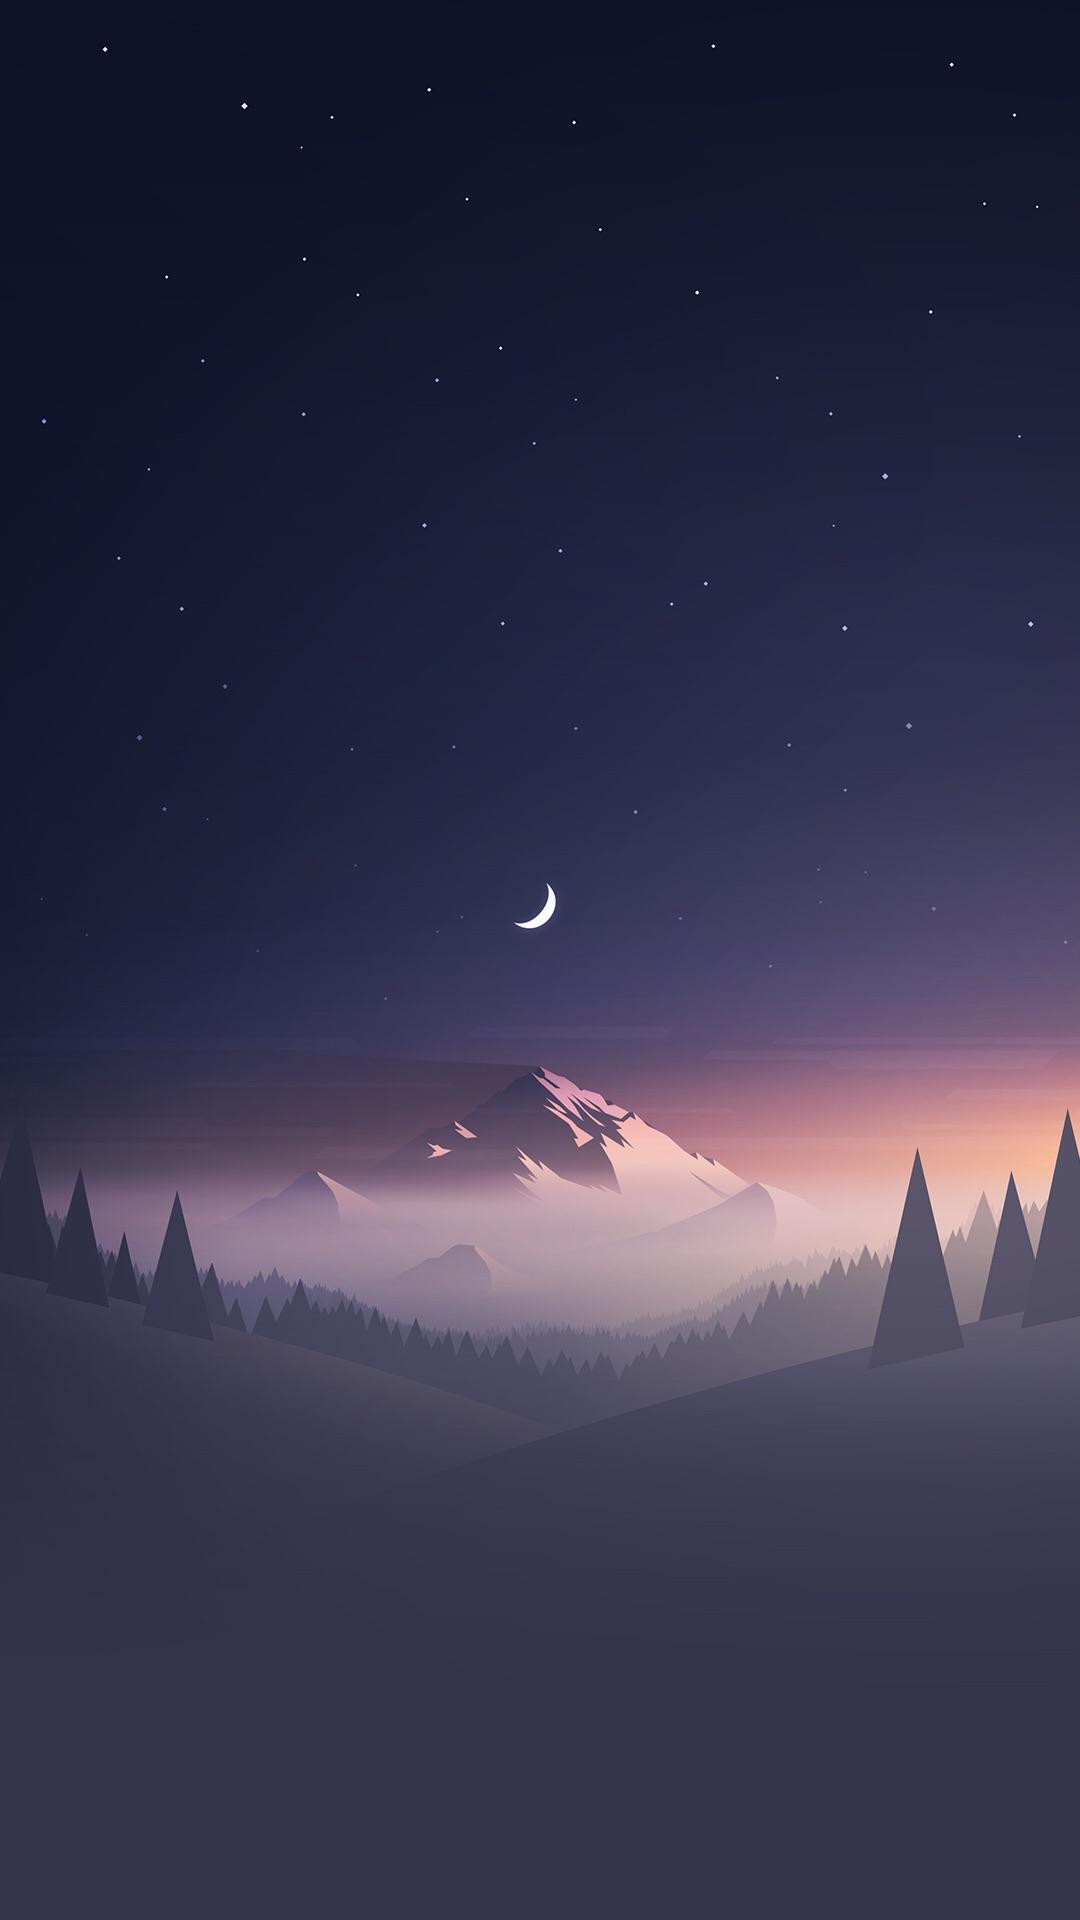 Starry night sky over a serene mountain landscape with crescent moon, perfect for a phone wallpaper.